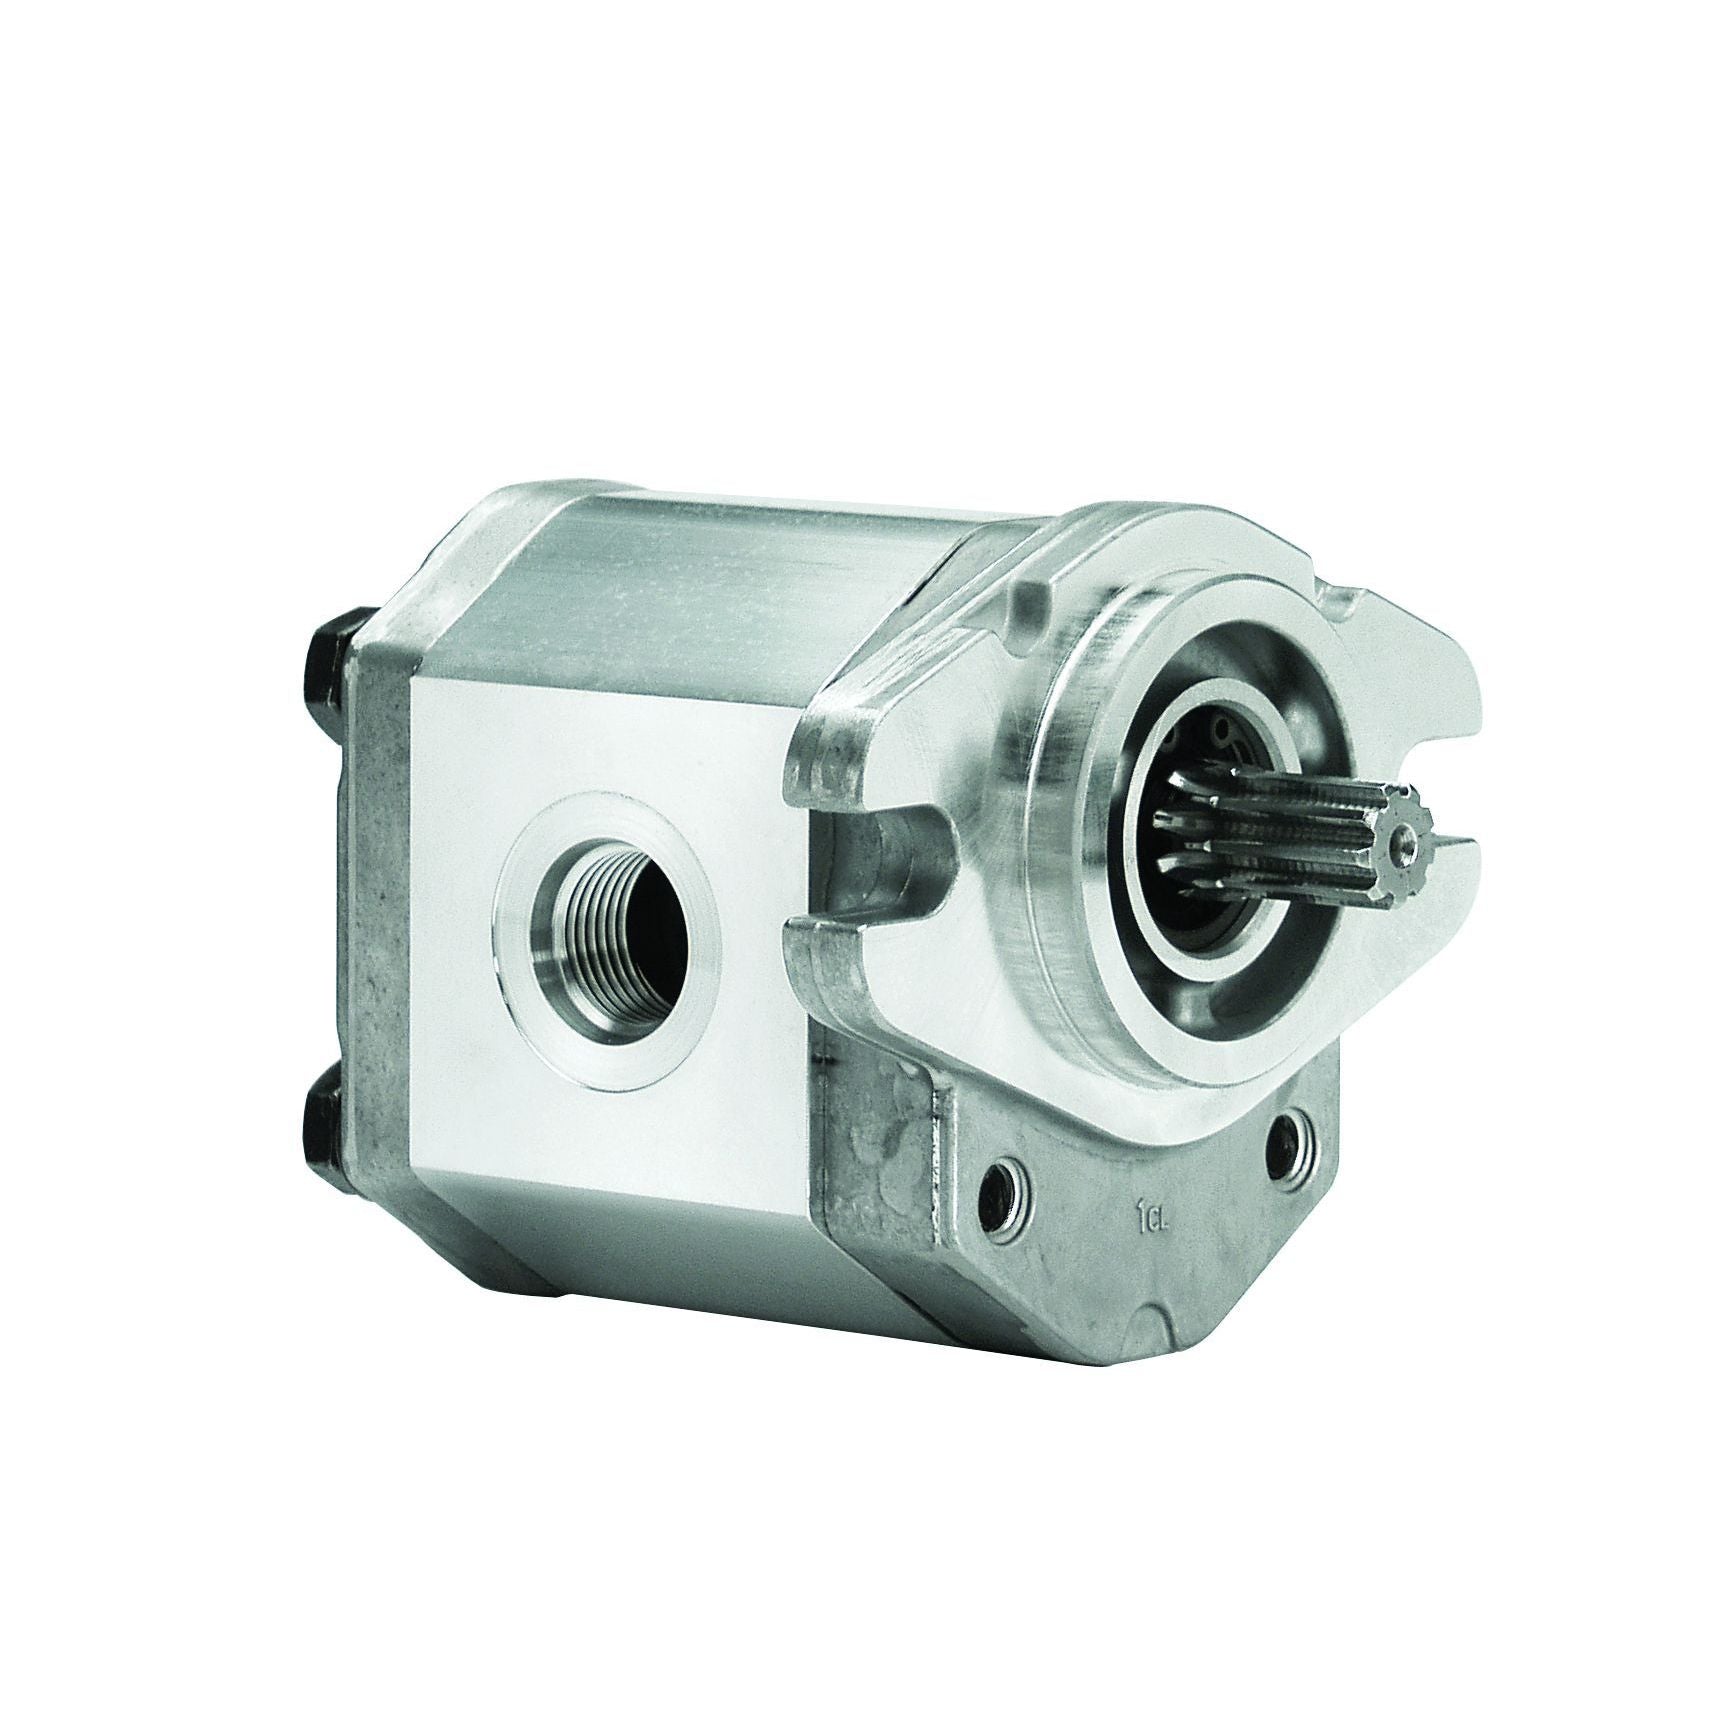 ALP3A-S-33-S1-FA : Marzocchi Gear Pump, CCW, 22cc (1.342in3), 10.46 GPM, 3335psi, 3300 RPM, #16 SAE (1") In, #12 SAE (3/4") Out, Splined Shaft 13T 16/32DP, SAE B 2-Bolt Mount